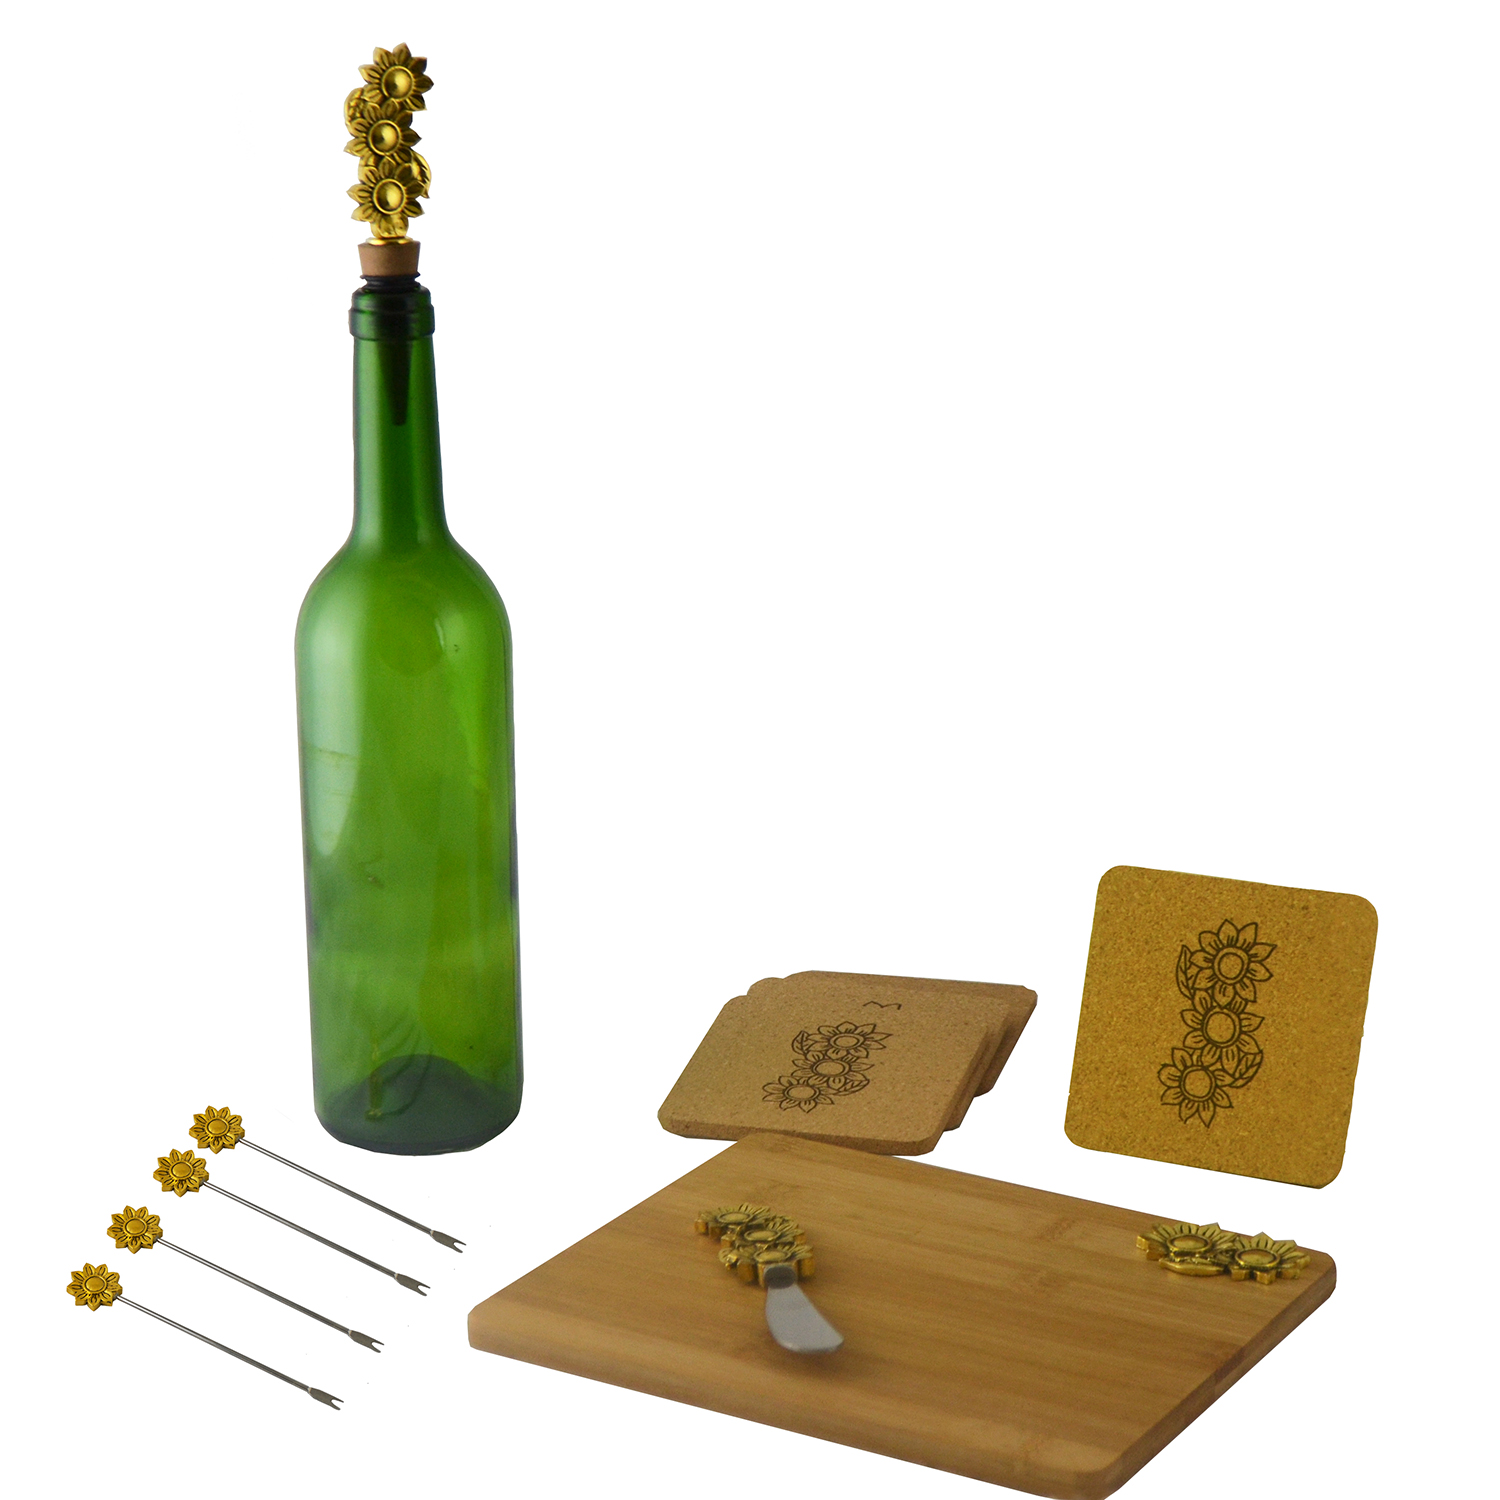 11-PC WINE & CHEESE SET, GOLD FLOWERS